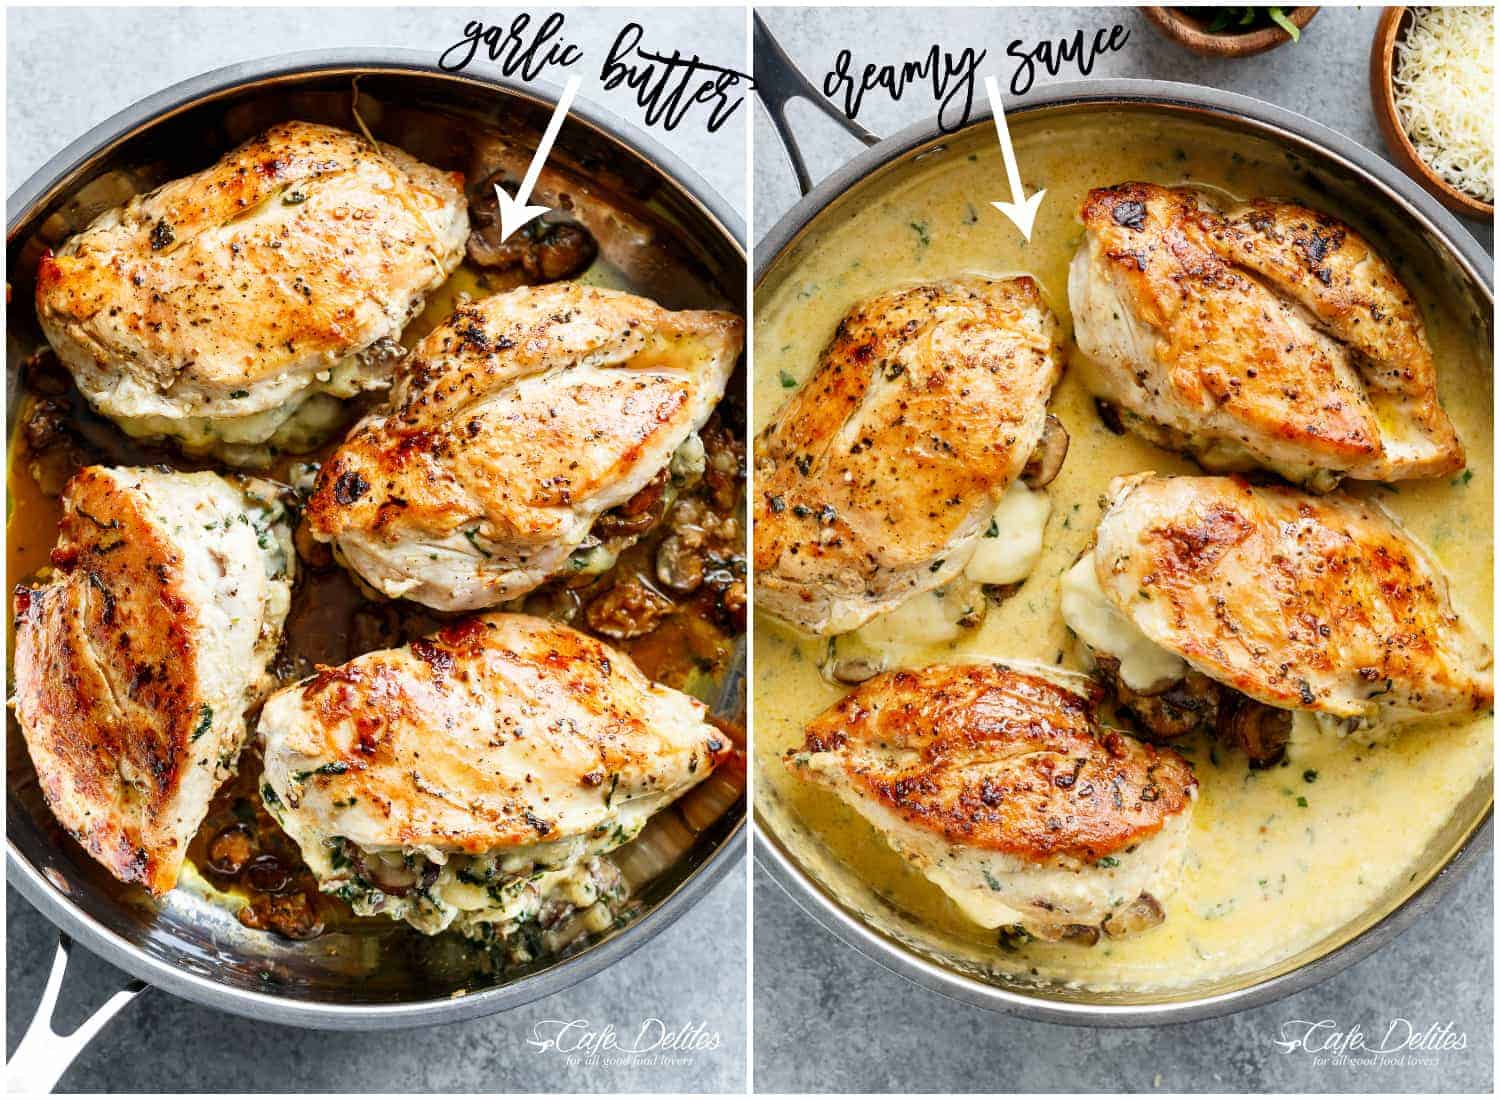 An image showing two different options for stuffed chicken in silver frying pan. Option one with no cream sauce, just pan juices in the pan. Option two shows cream sauce in the pan.